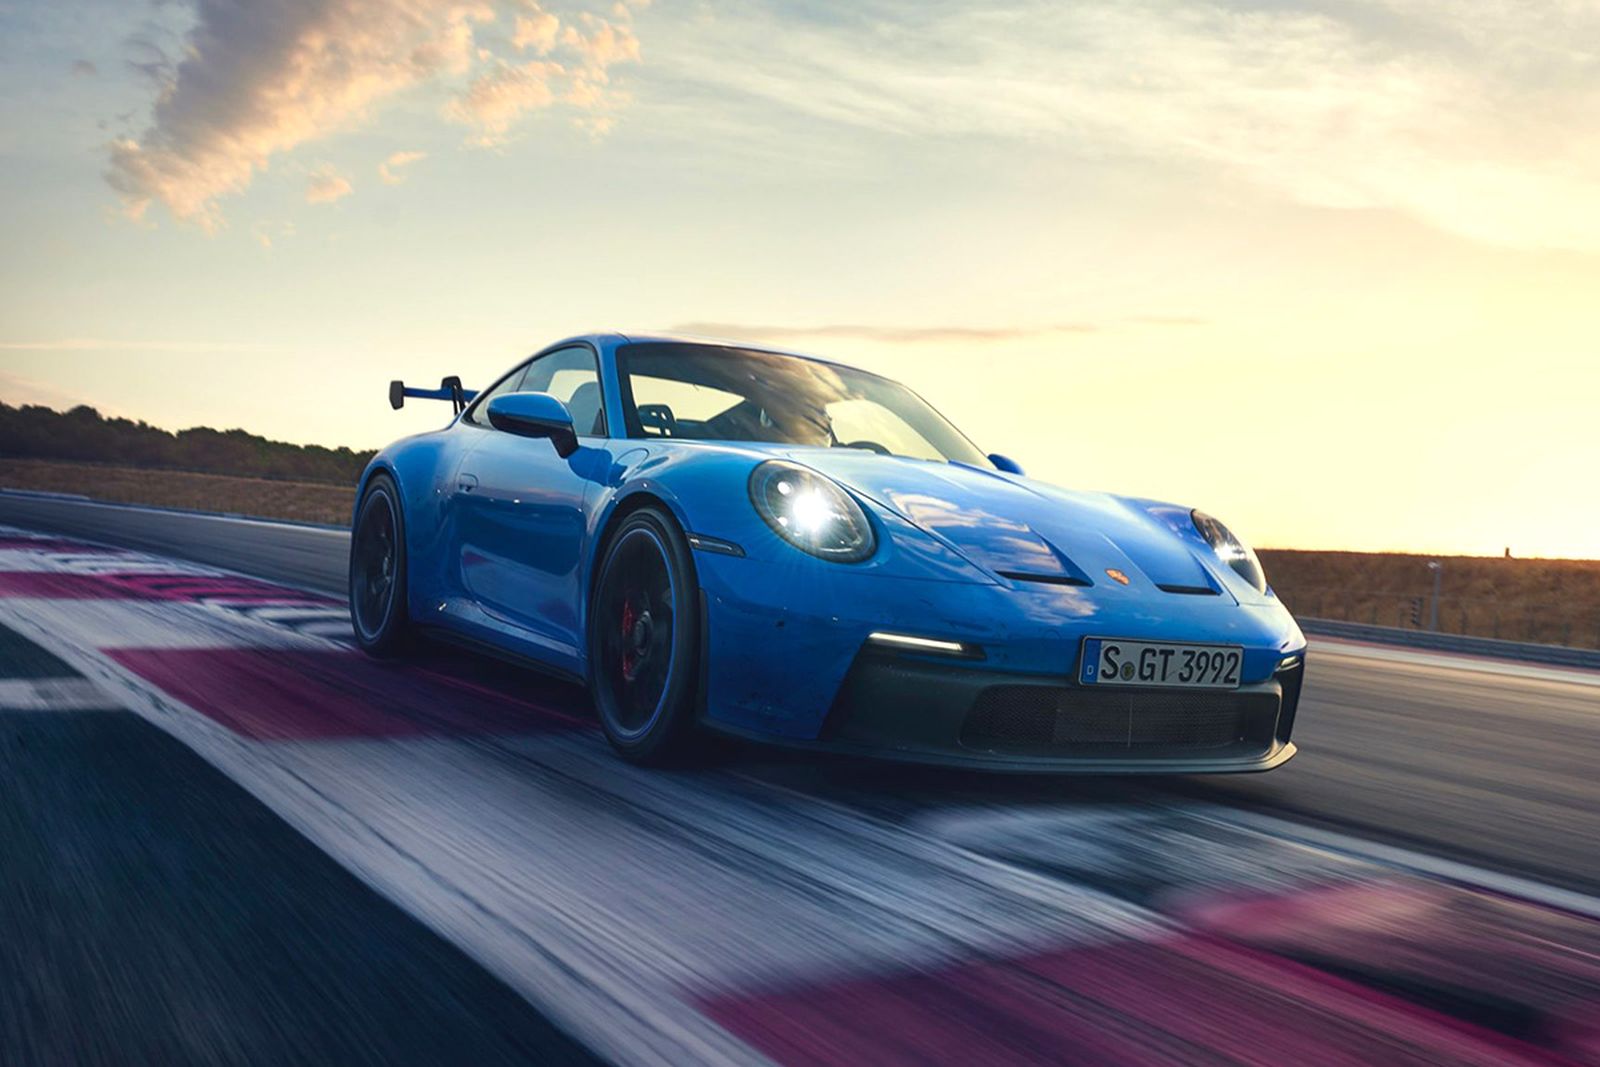 The new Porsche 911 GT3, which debuted in a striking Shark Blue